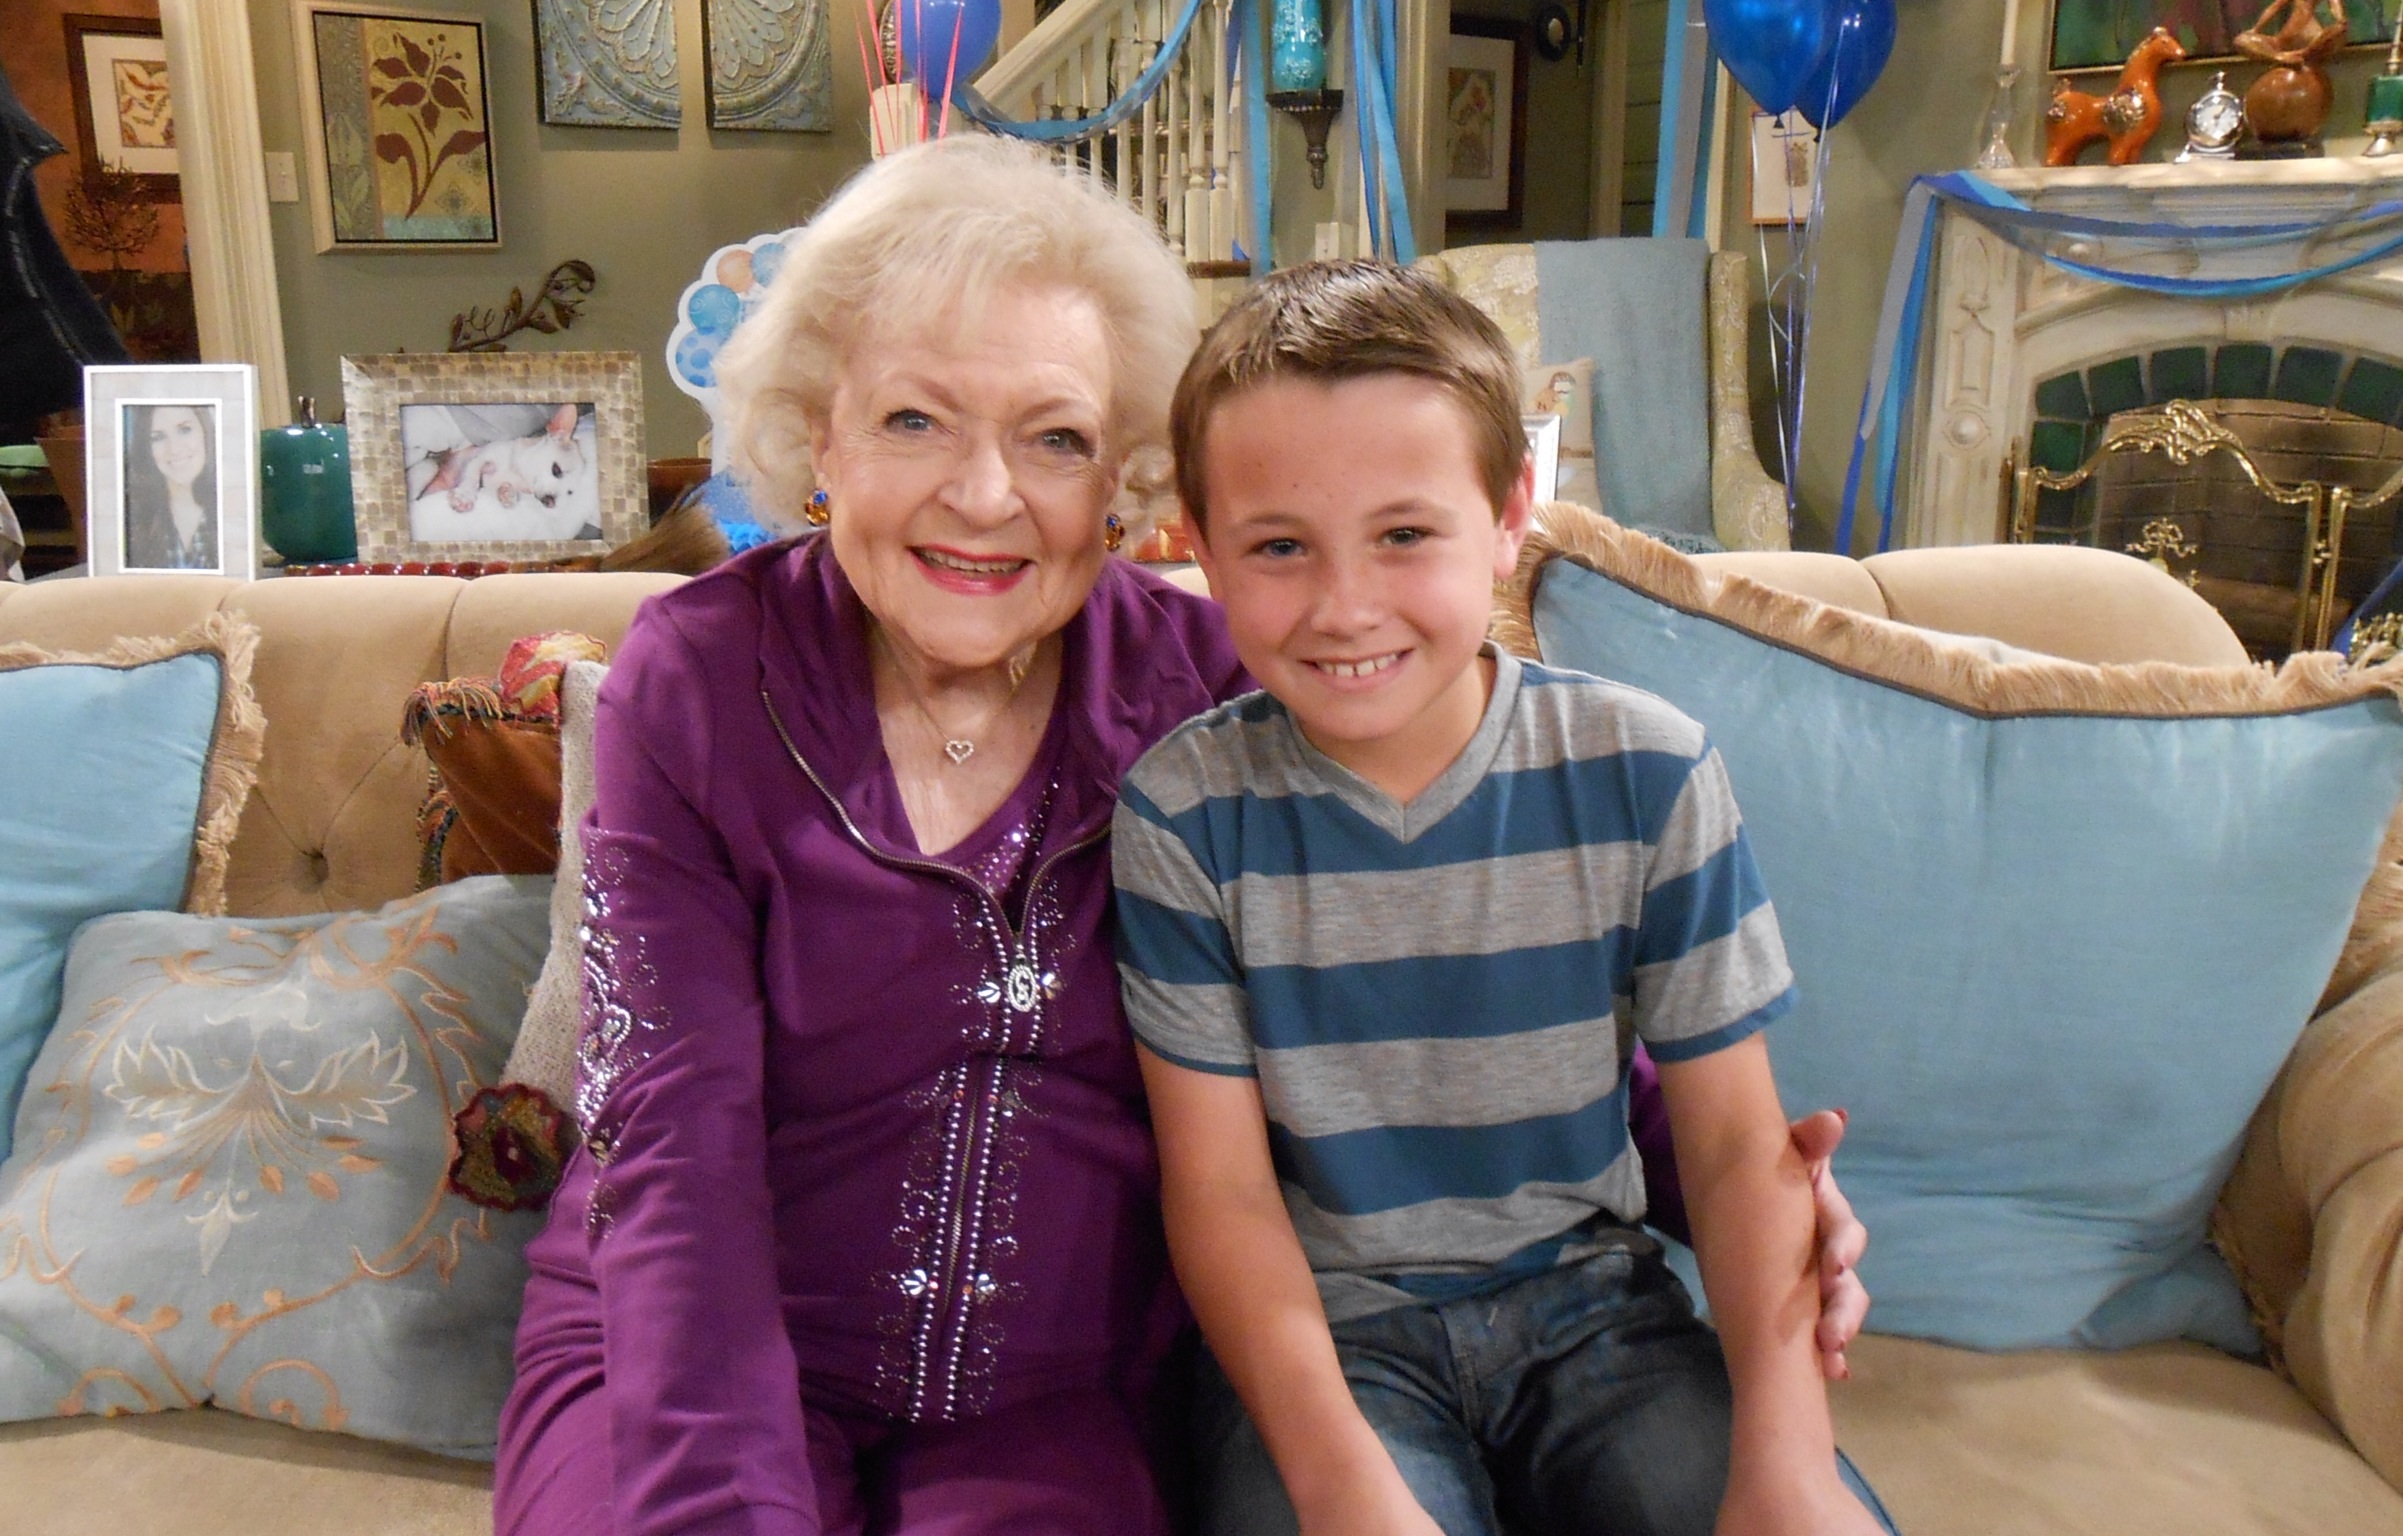 Betty White and Cameron Castaneda on the set of Hot in Cleveland